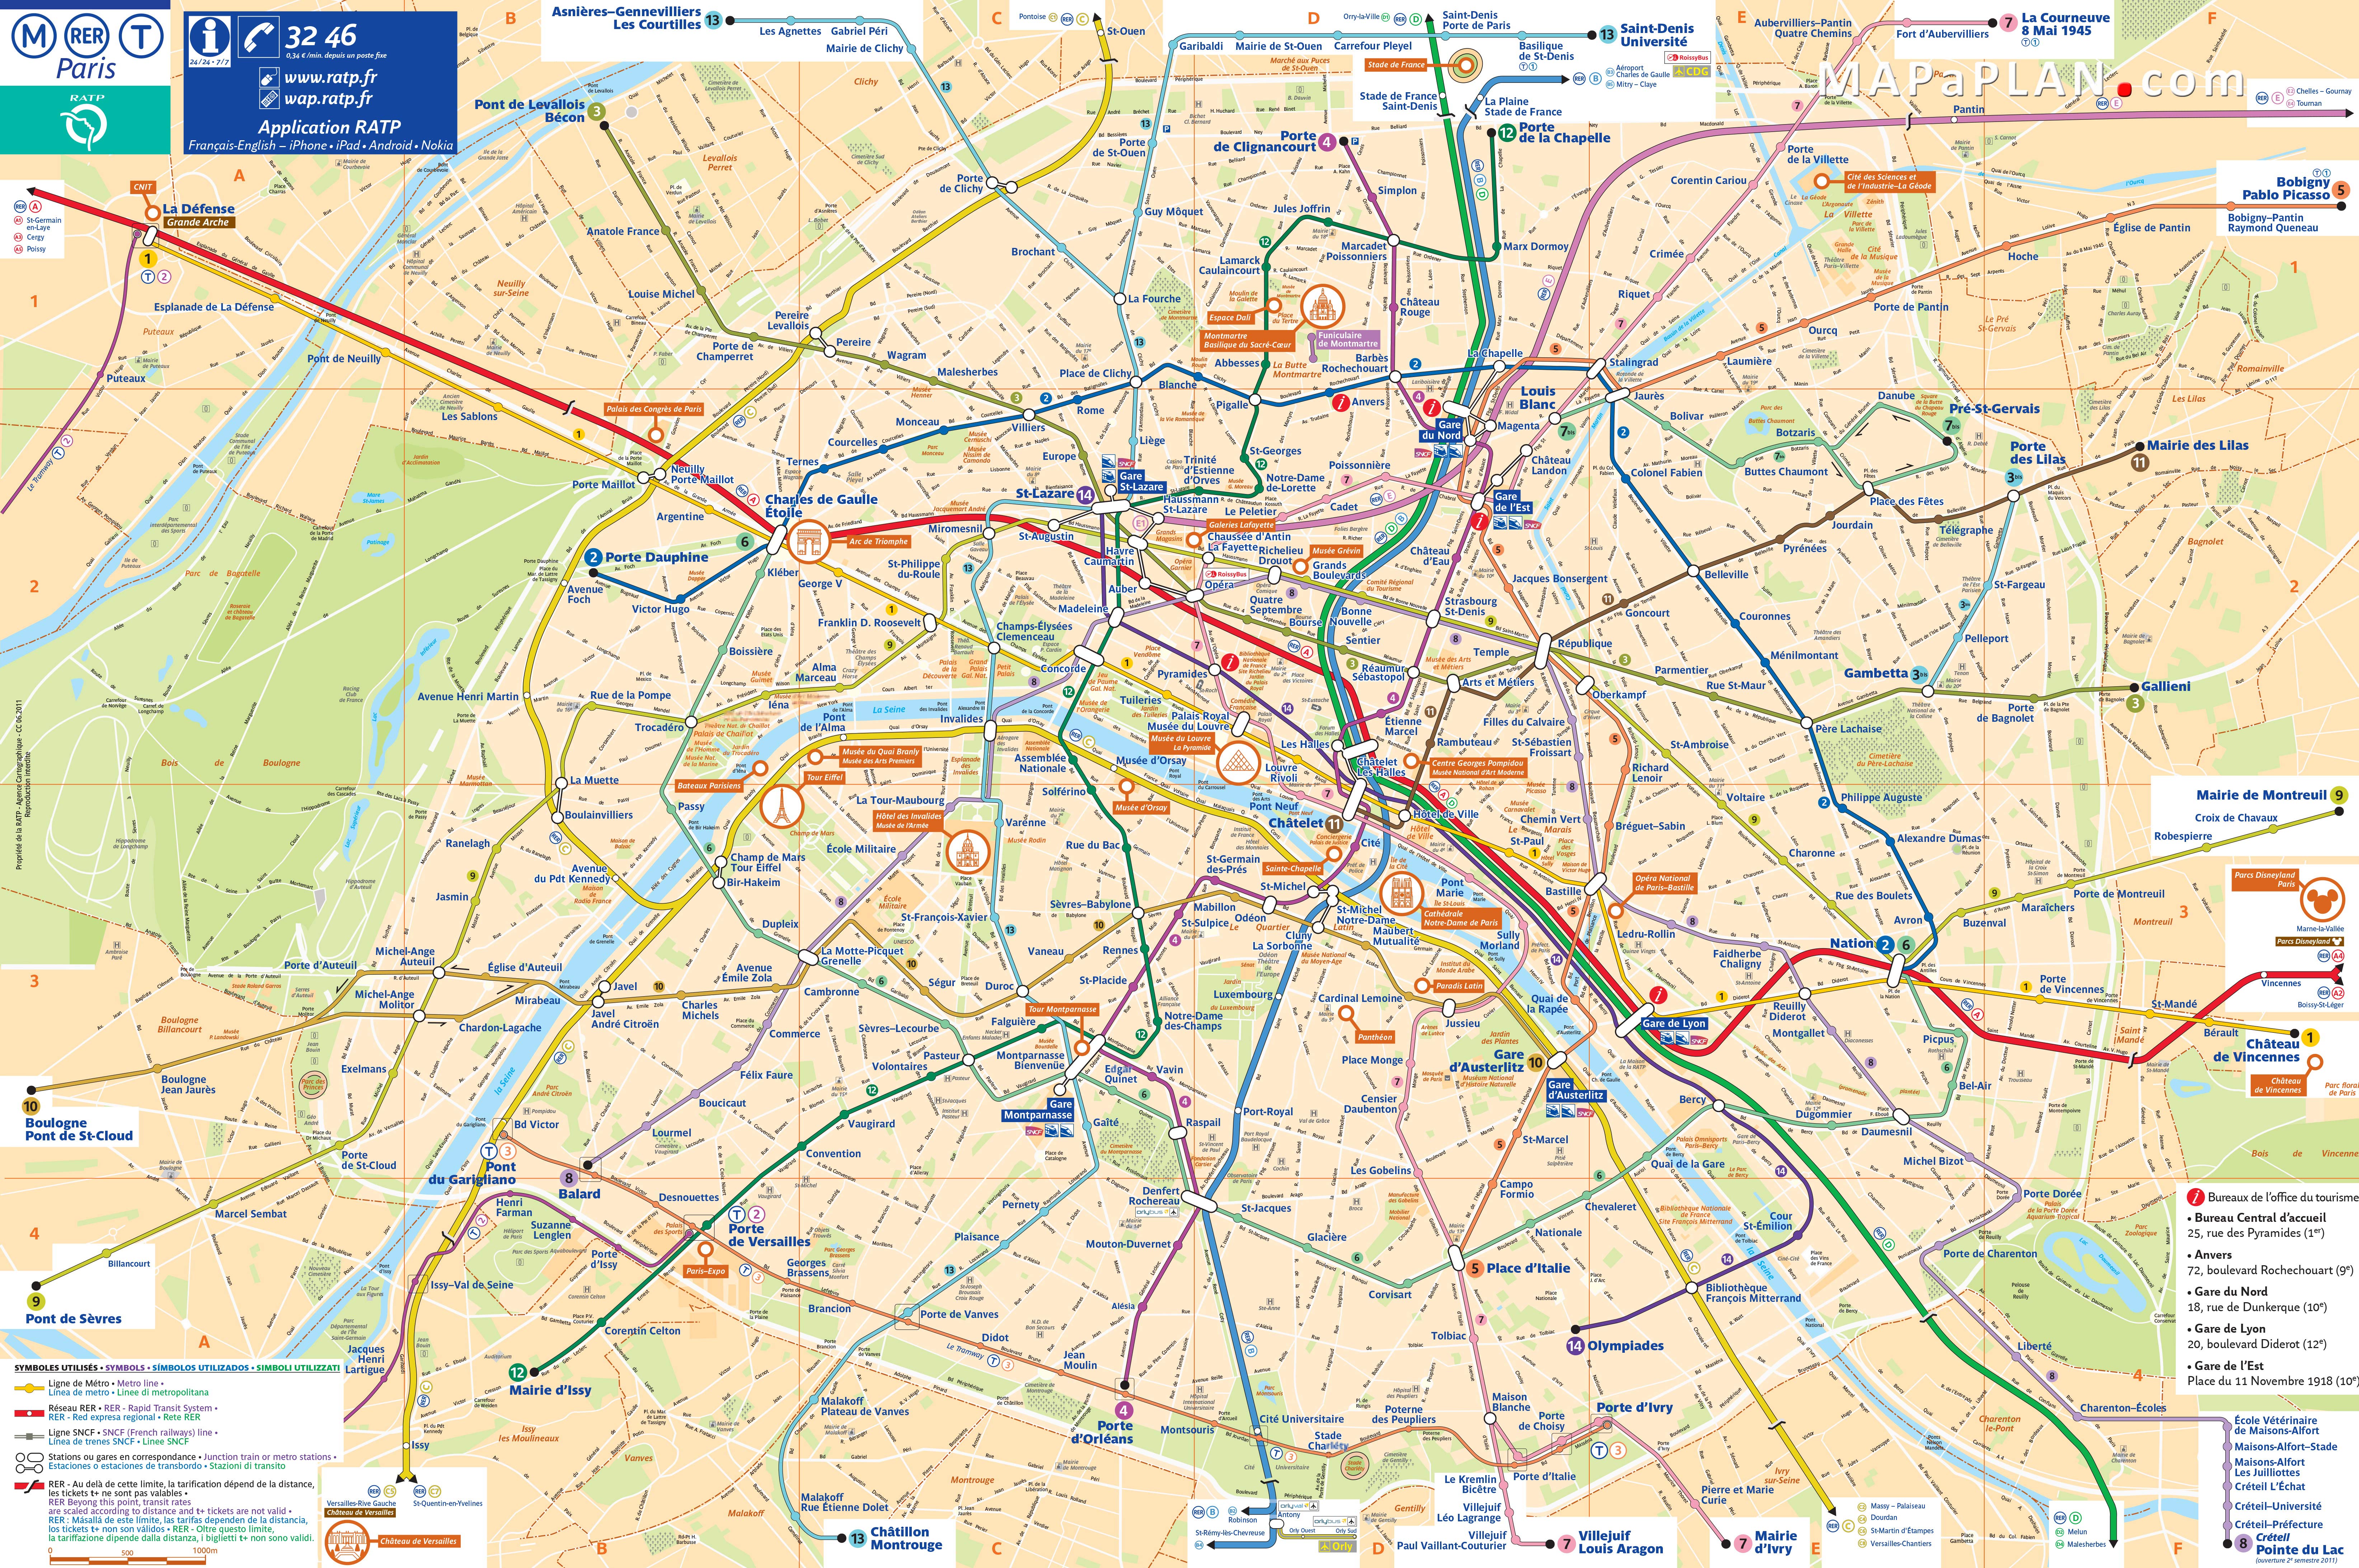 Paris top tourist attractions map Most popular places to visit detailed guide